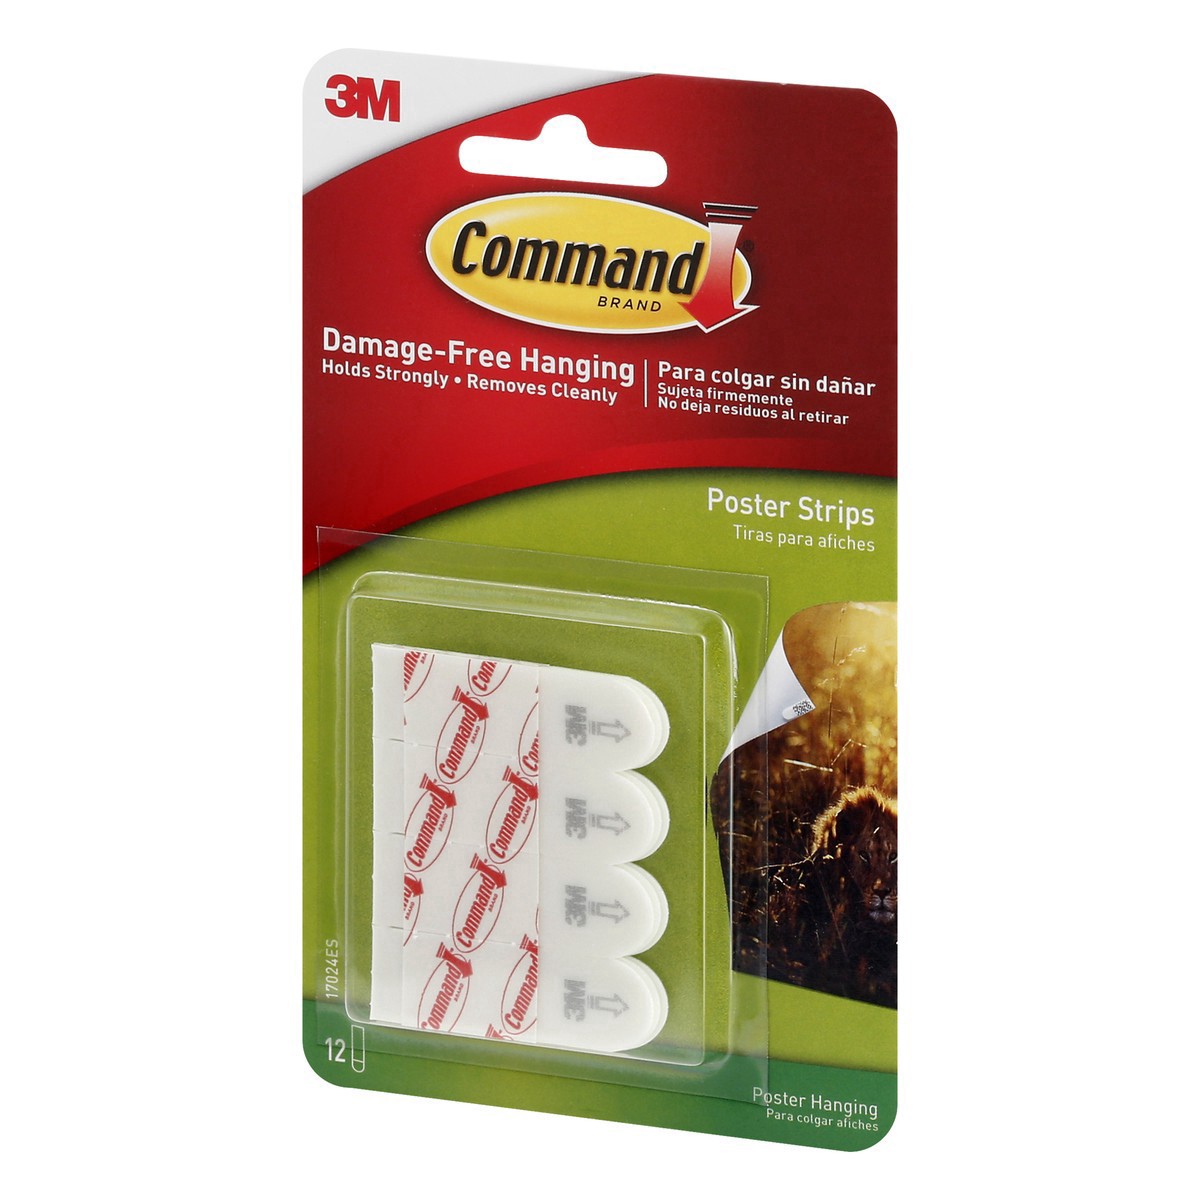 slide 9 of 10, 3M Command Poster Damage-Free Hanging Strips, 12 ct